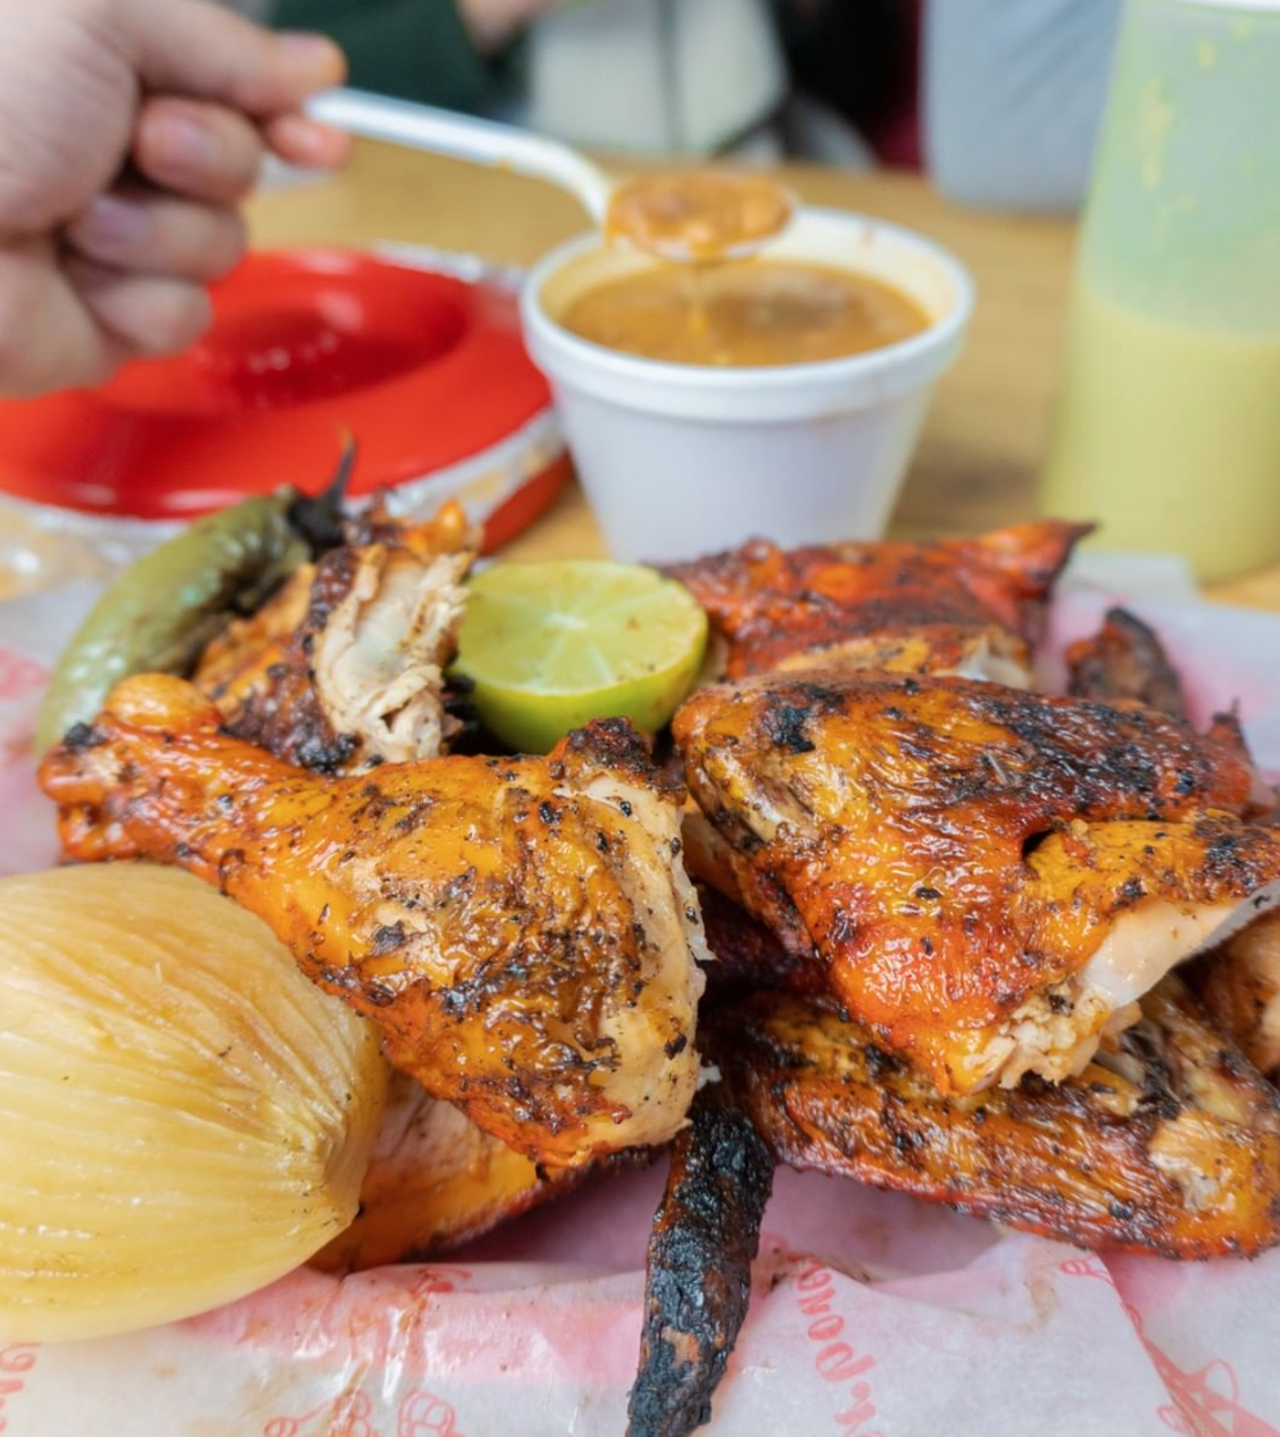 Pollos Asados El Carbonero
619 S General McMullen Dr, (210) 907-5573, elcarboneropolloycarne.negocio.site
Juicy chicken and tender fajitas await you at this buzzy eatery. Half chicken or a whole chicken, fajita or ribs — no matter what you order, it’ll hit the spot and be damn delicious. Go for the parrillada if you’re really trying to party.
Photo via Instagram / elcarboneropolloycarne